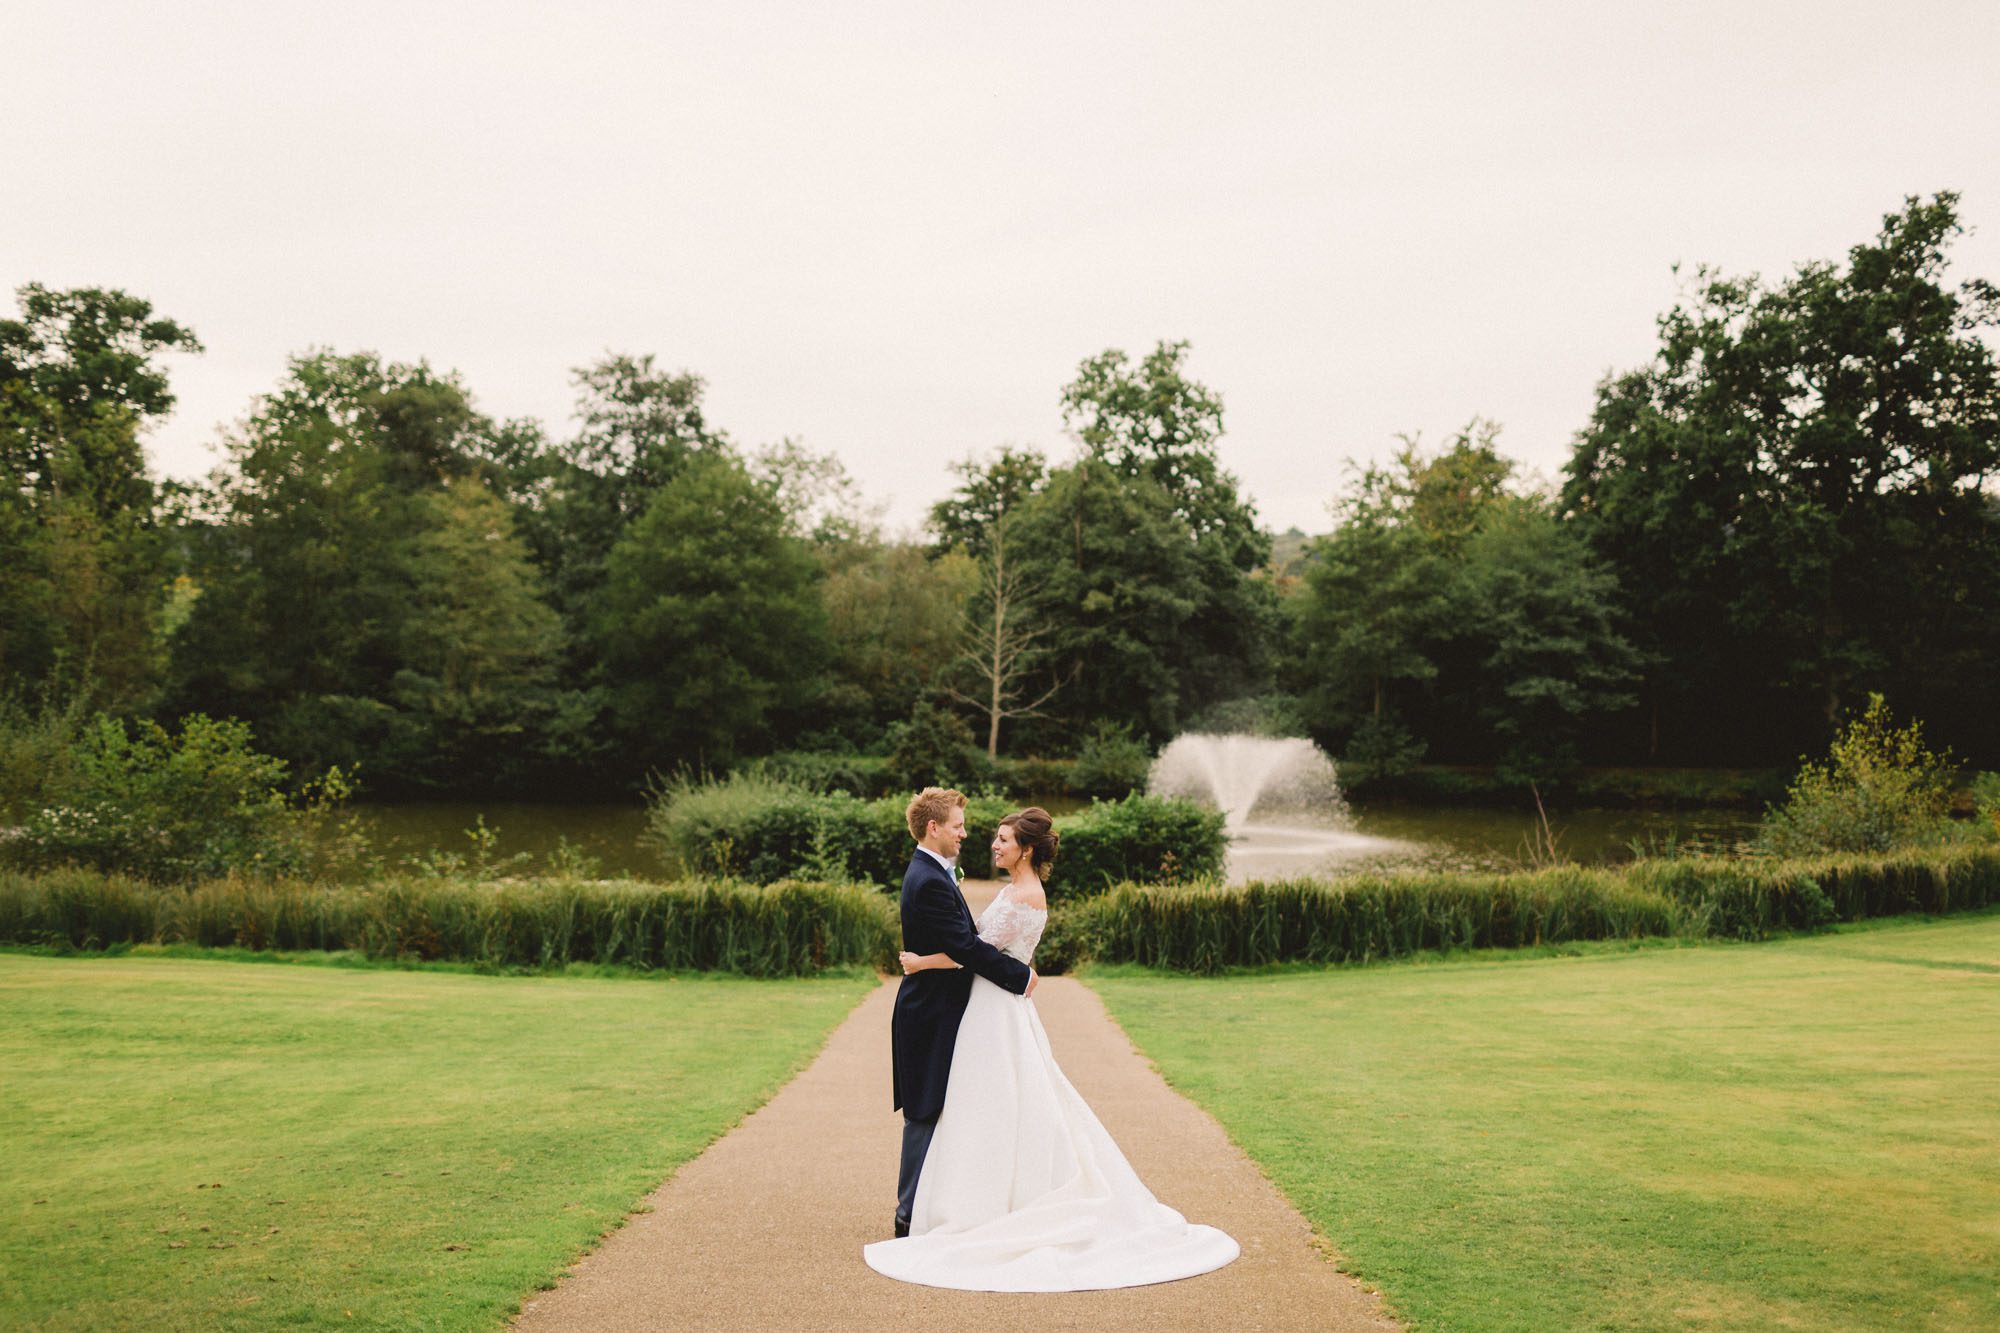 Bride and groom hug closely on their wedding day at Ashdown Park Wedding Venue in Sussex.